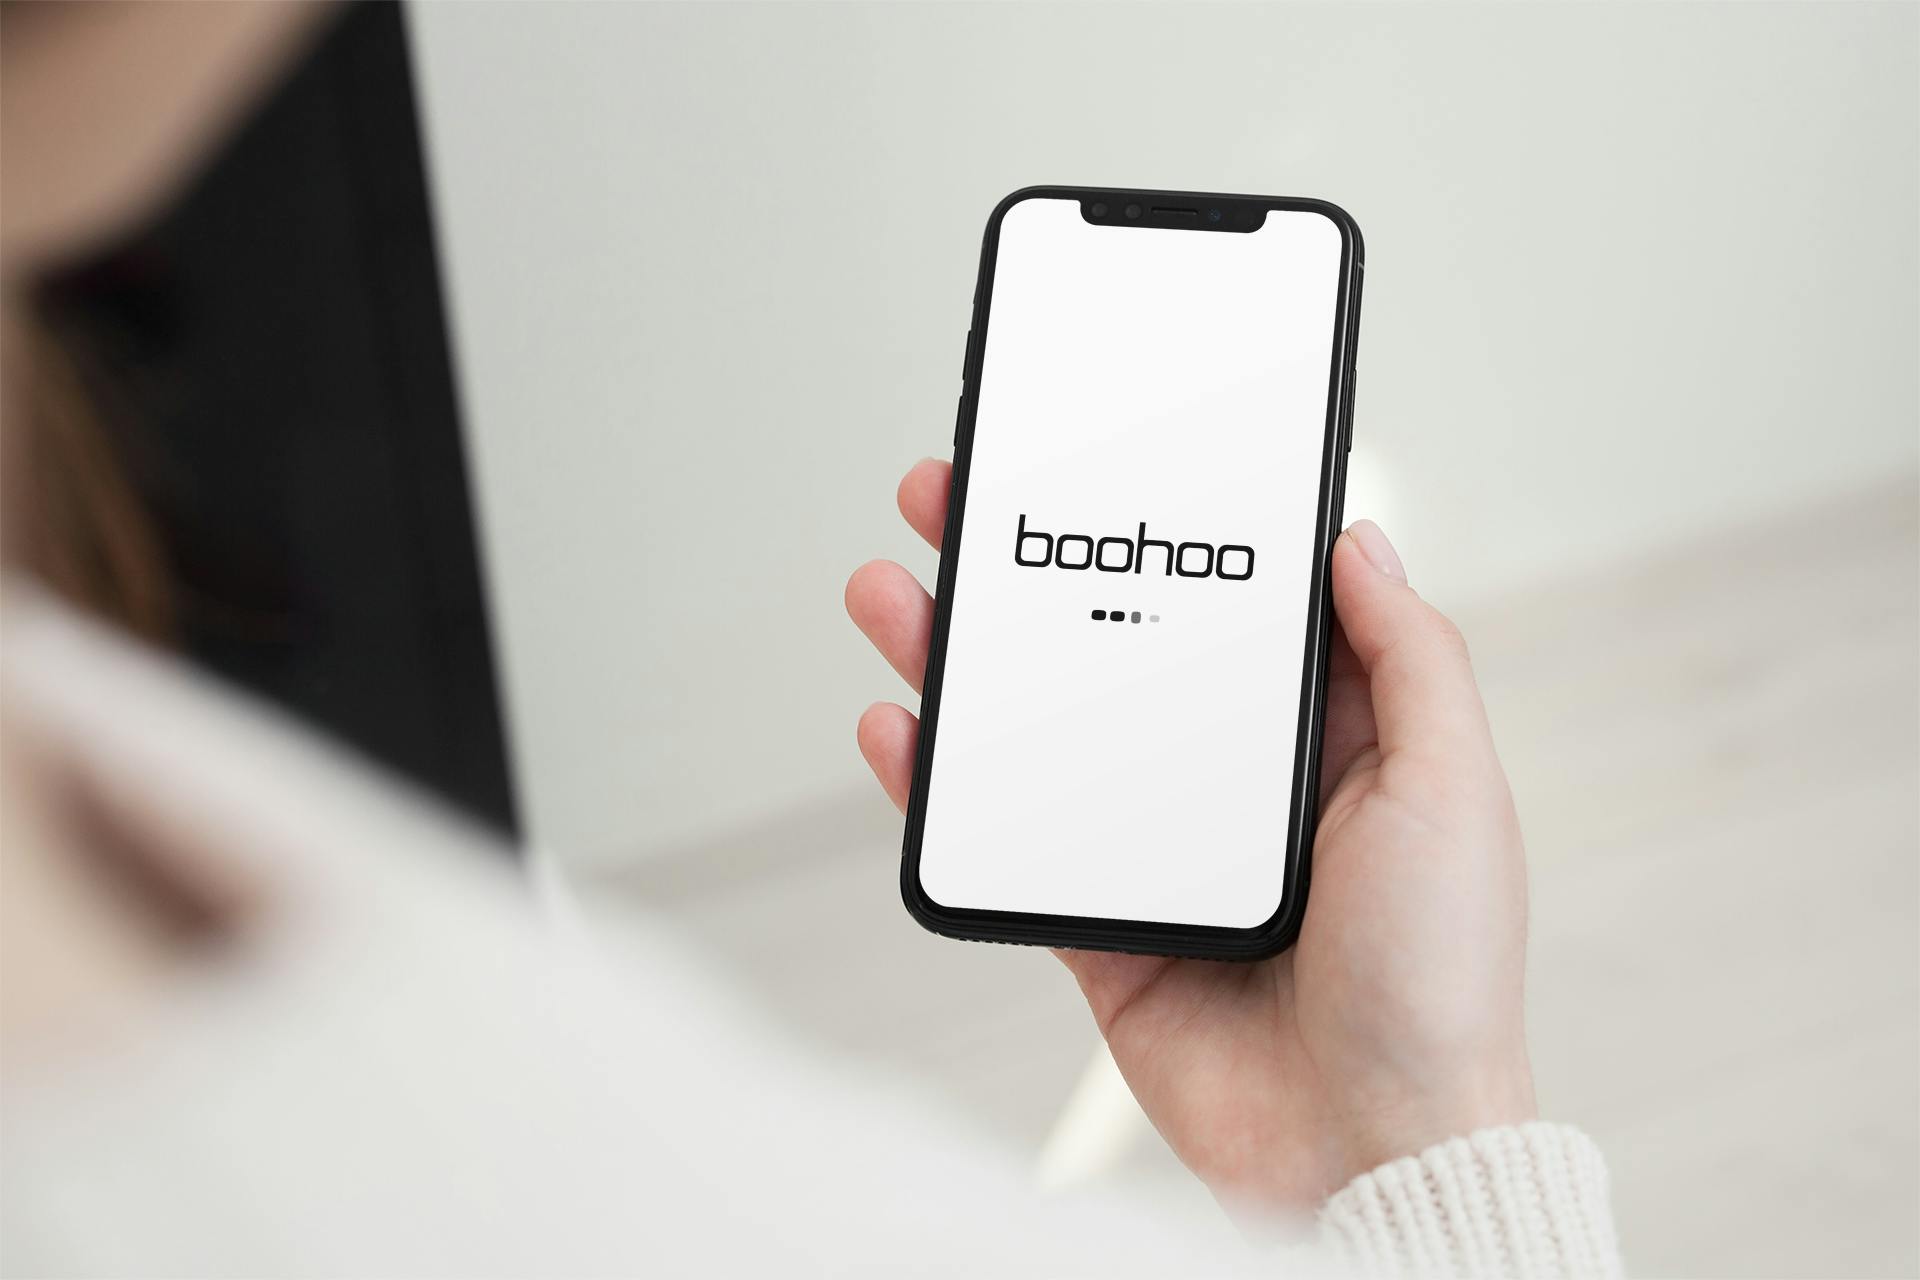 A person holding an iPhone displaying the boohoo app start up screen.